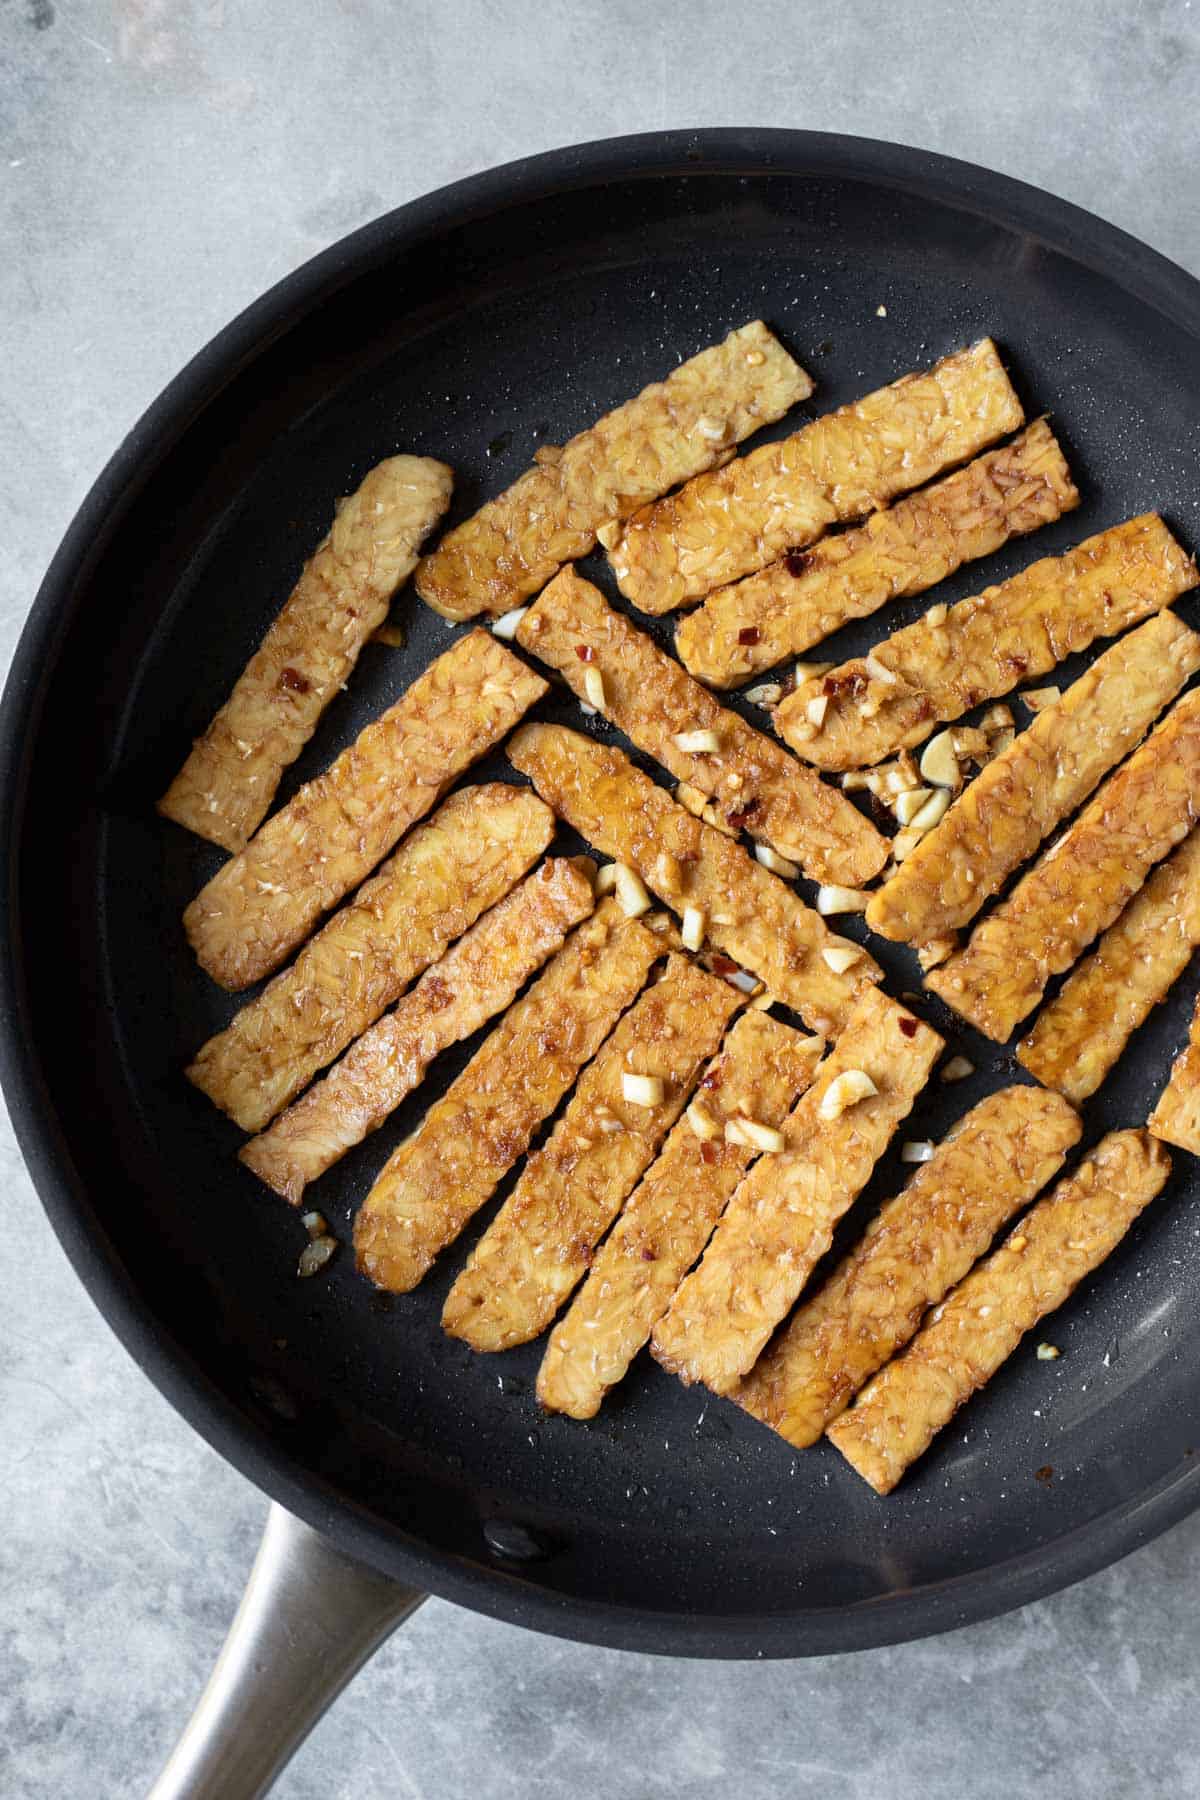 cooking sliced, marinated tempeh in a non-stick pan.